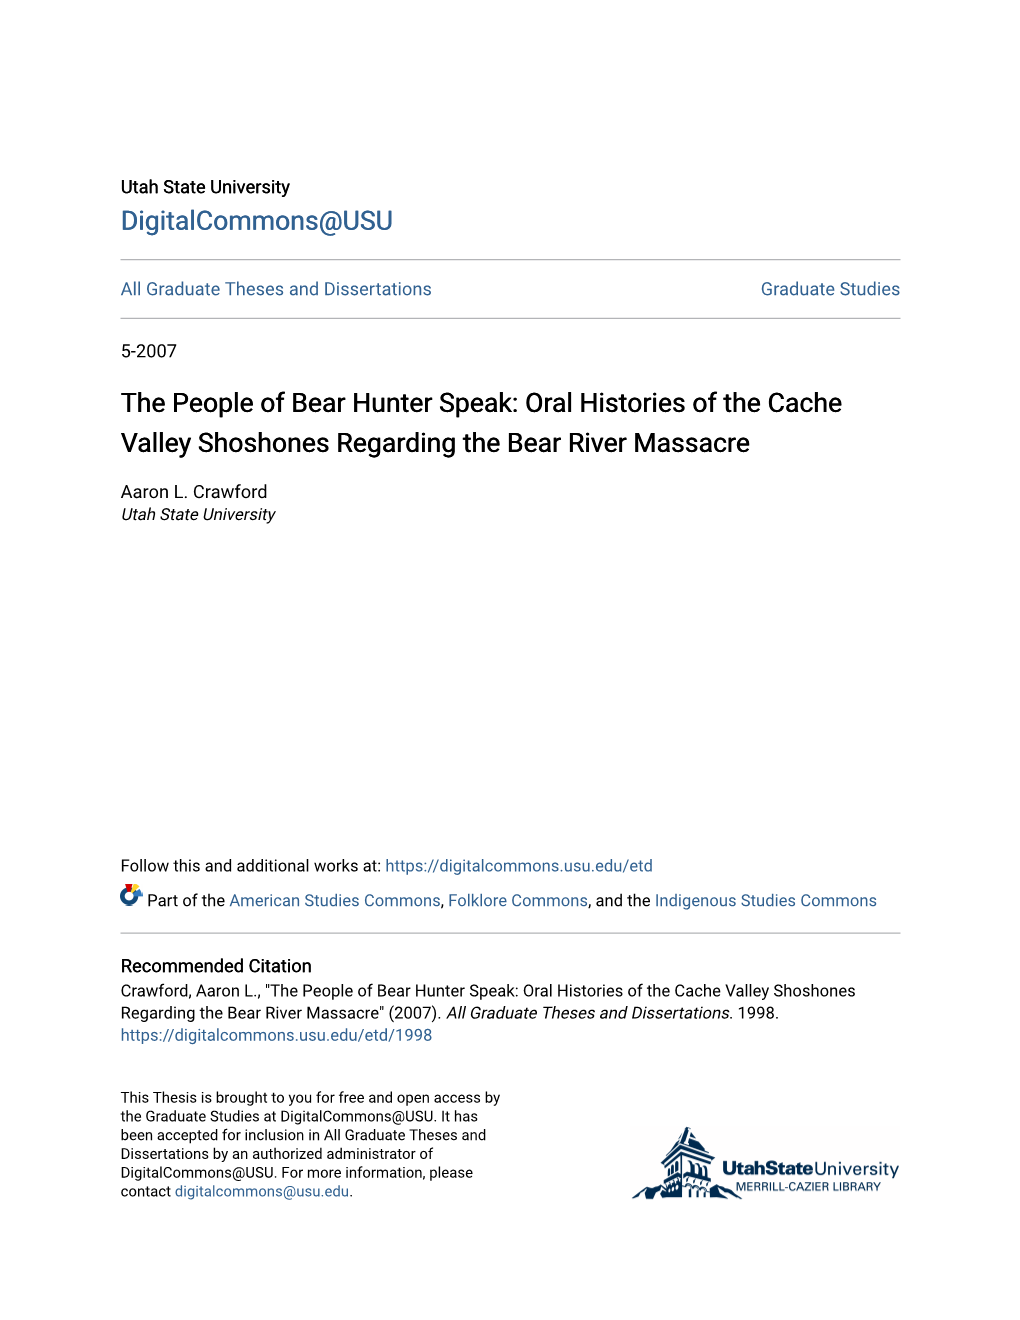 The People of Bear Hunter Speak: Oral Histories of the Cache Valley Shoshones Regarding the Bear River Massacre